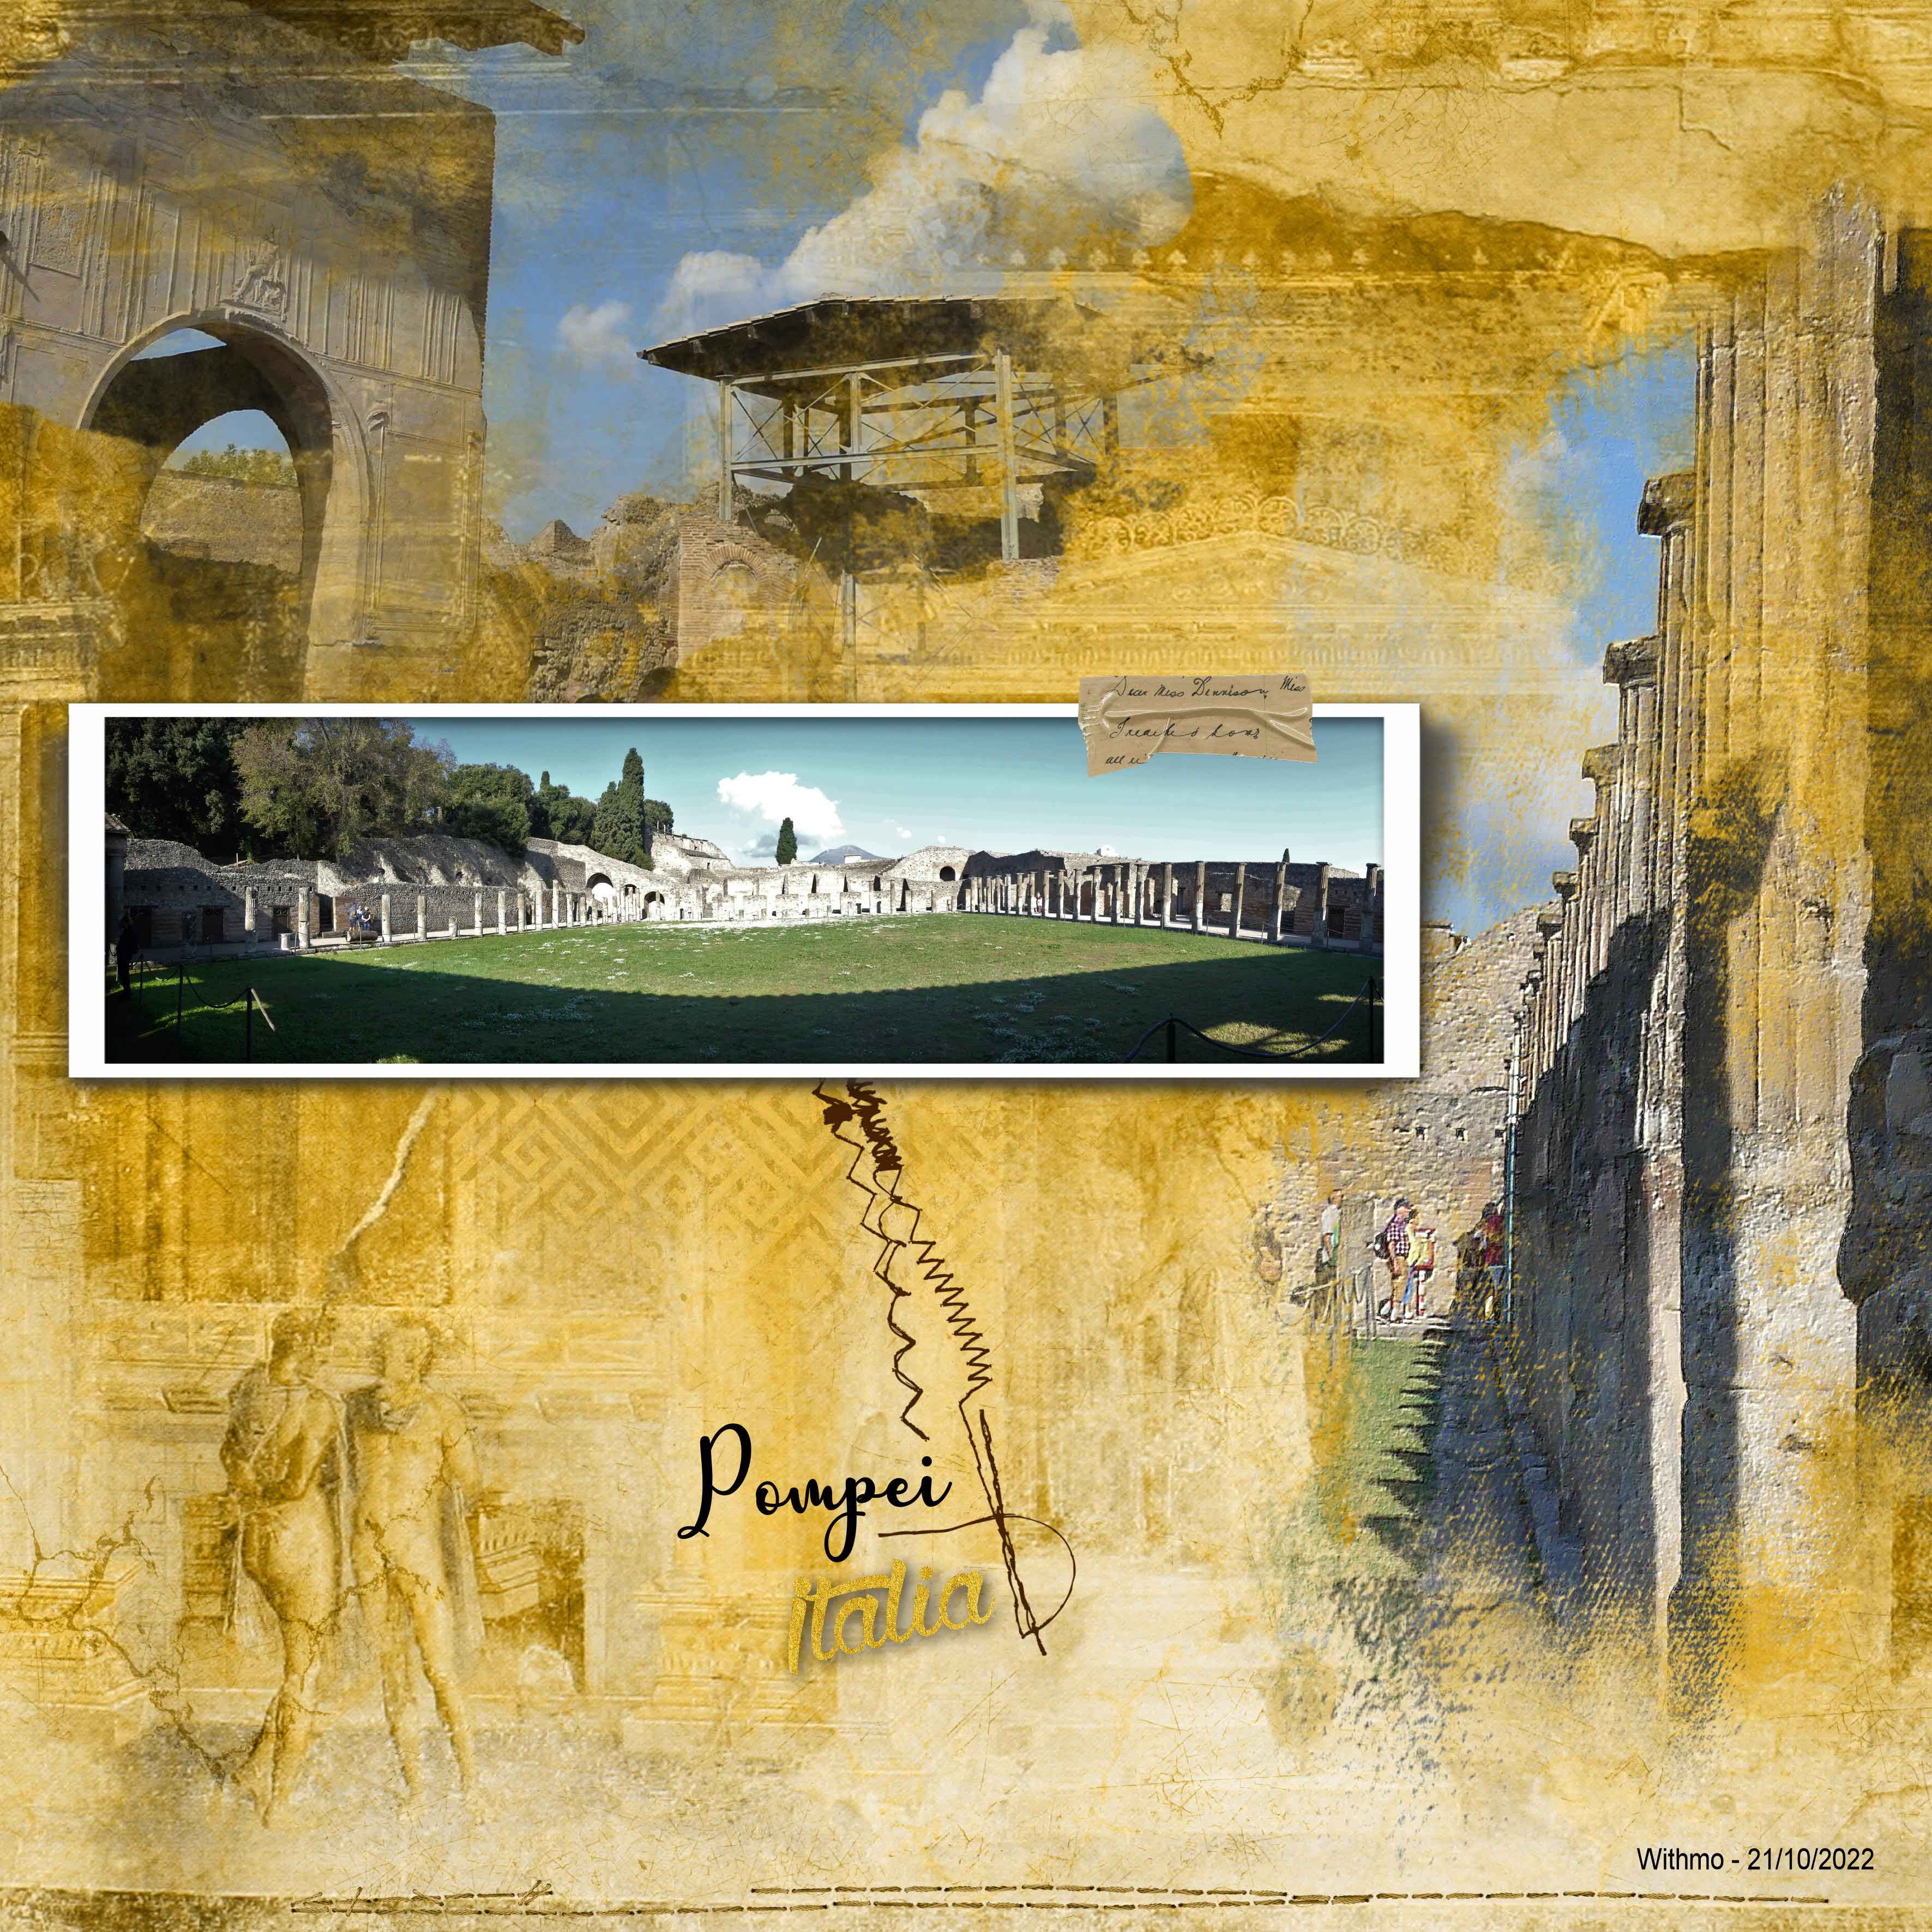 <span  class="uc_style_uc_tiles_grid_image_elementor_uc_items_attribute_title" style="color:#ffffff;">Scraptober 2022 withmo_paysage Italie Pompei</span>